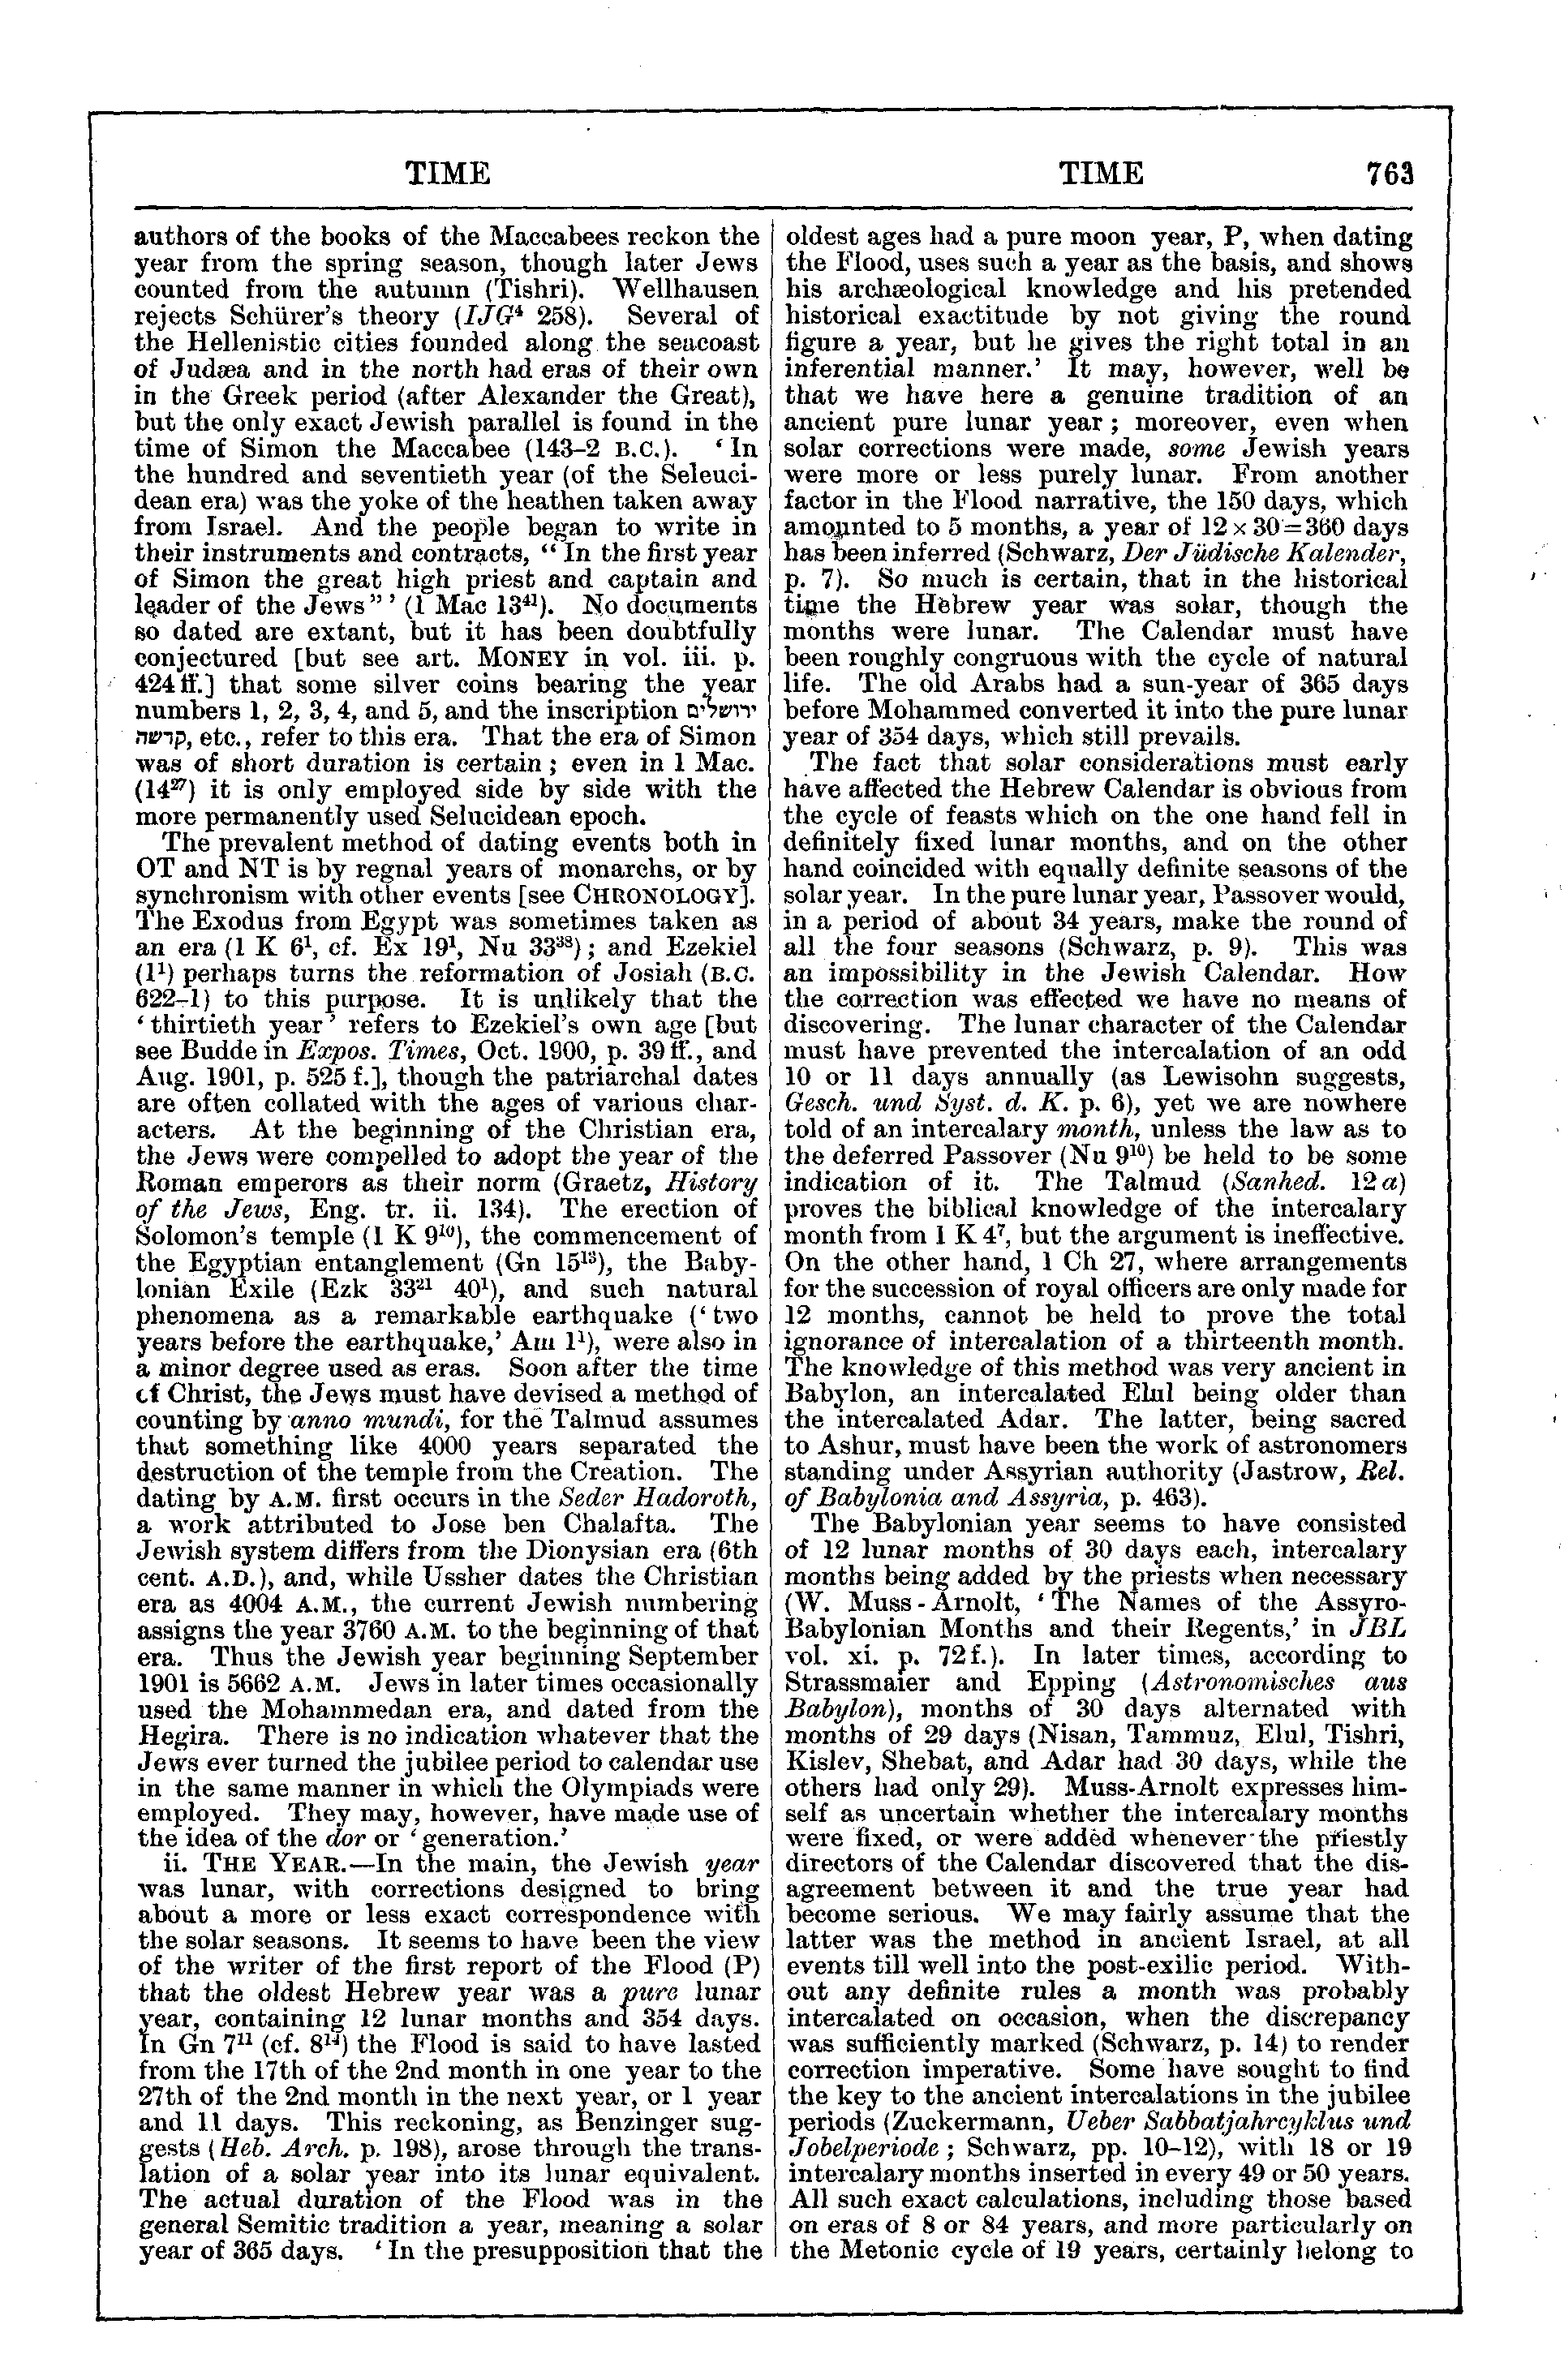 Image of page 763